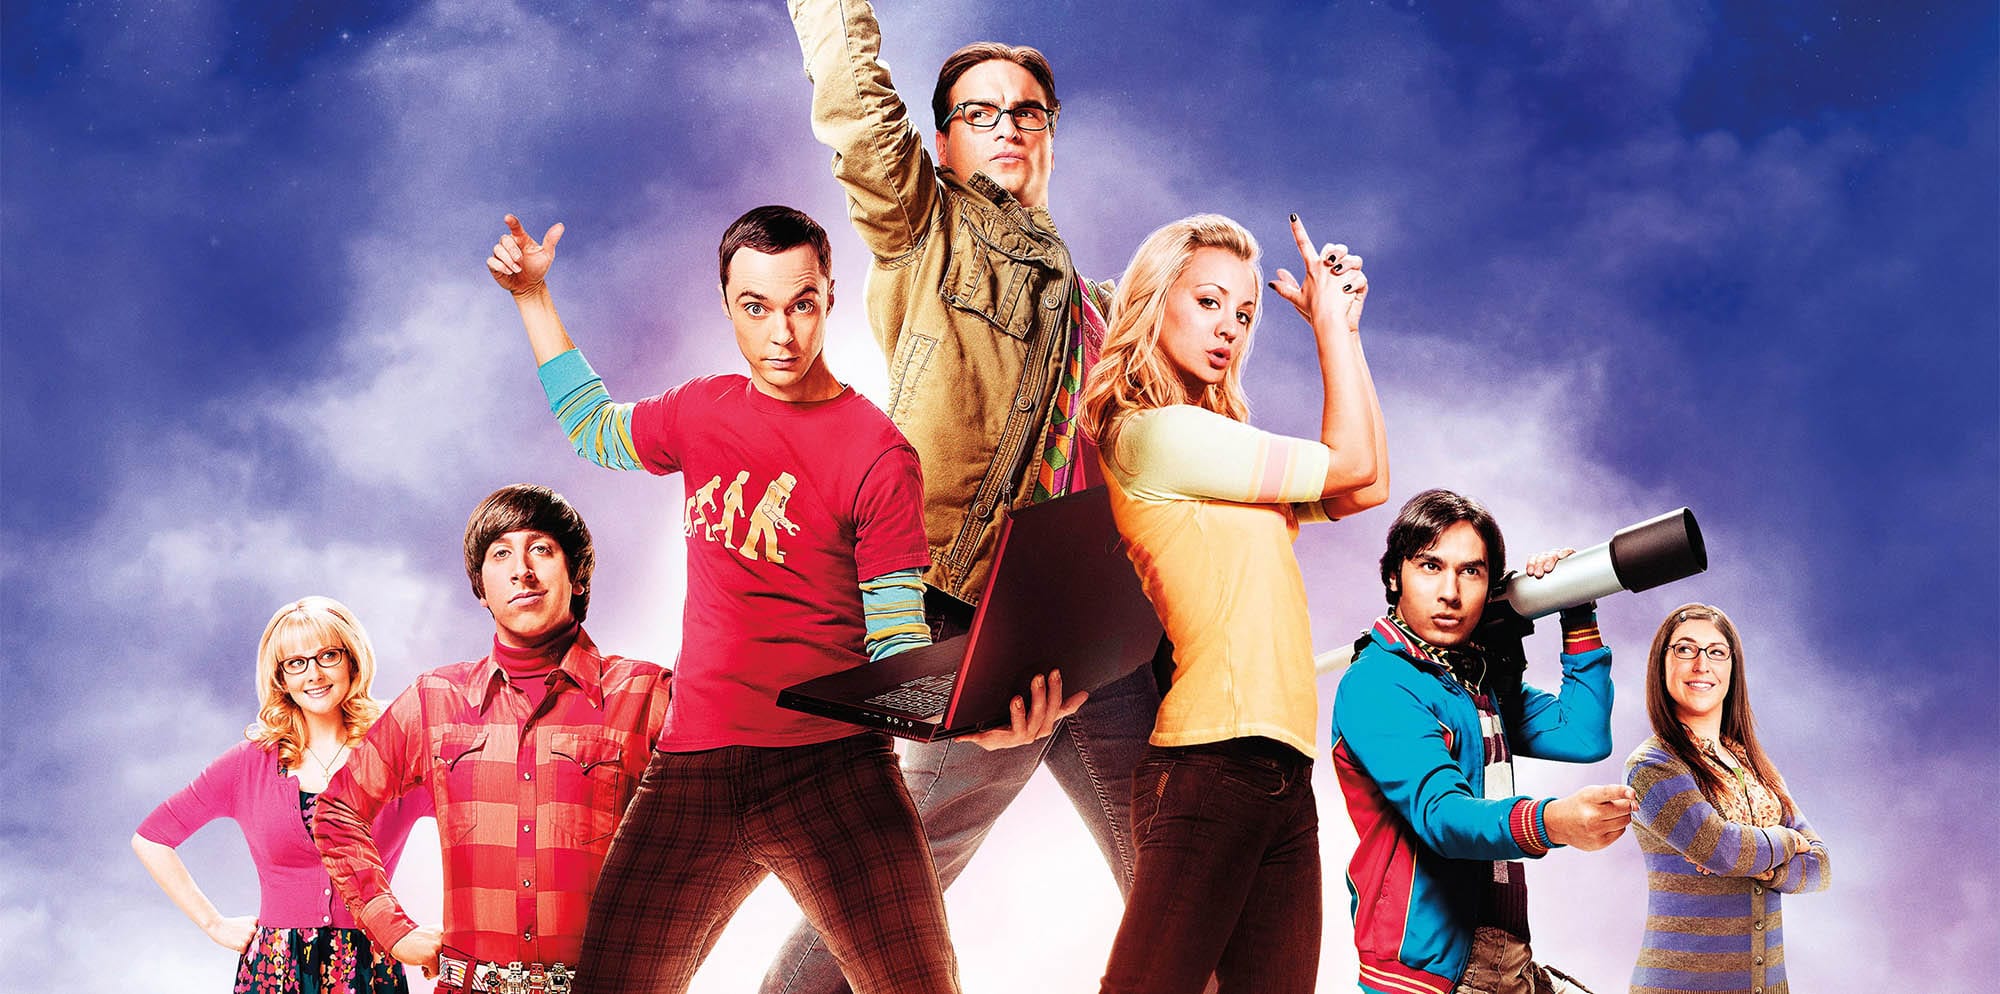 No doubt fans are upset 'The Big Bang Theory' has made its exit. But after twelve seasons, we’d say it’s had a pretty good run. Plus, it stinks. Here’s why.